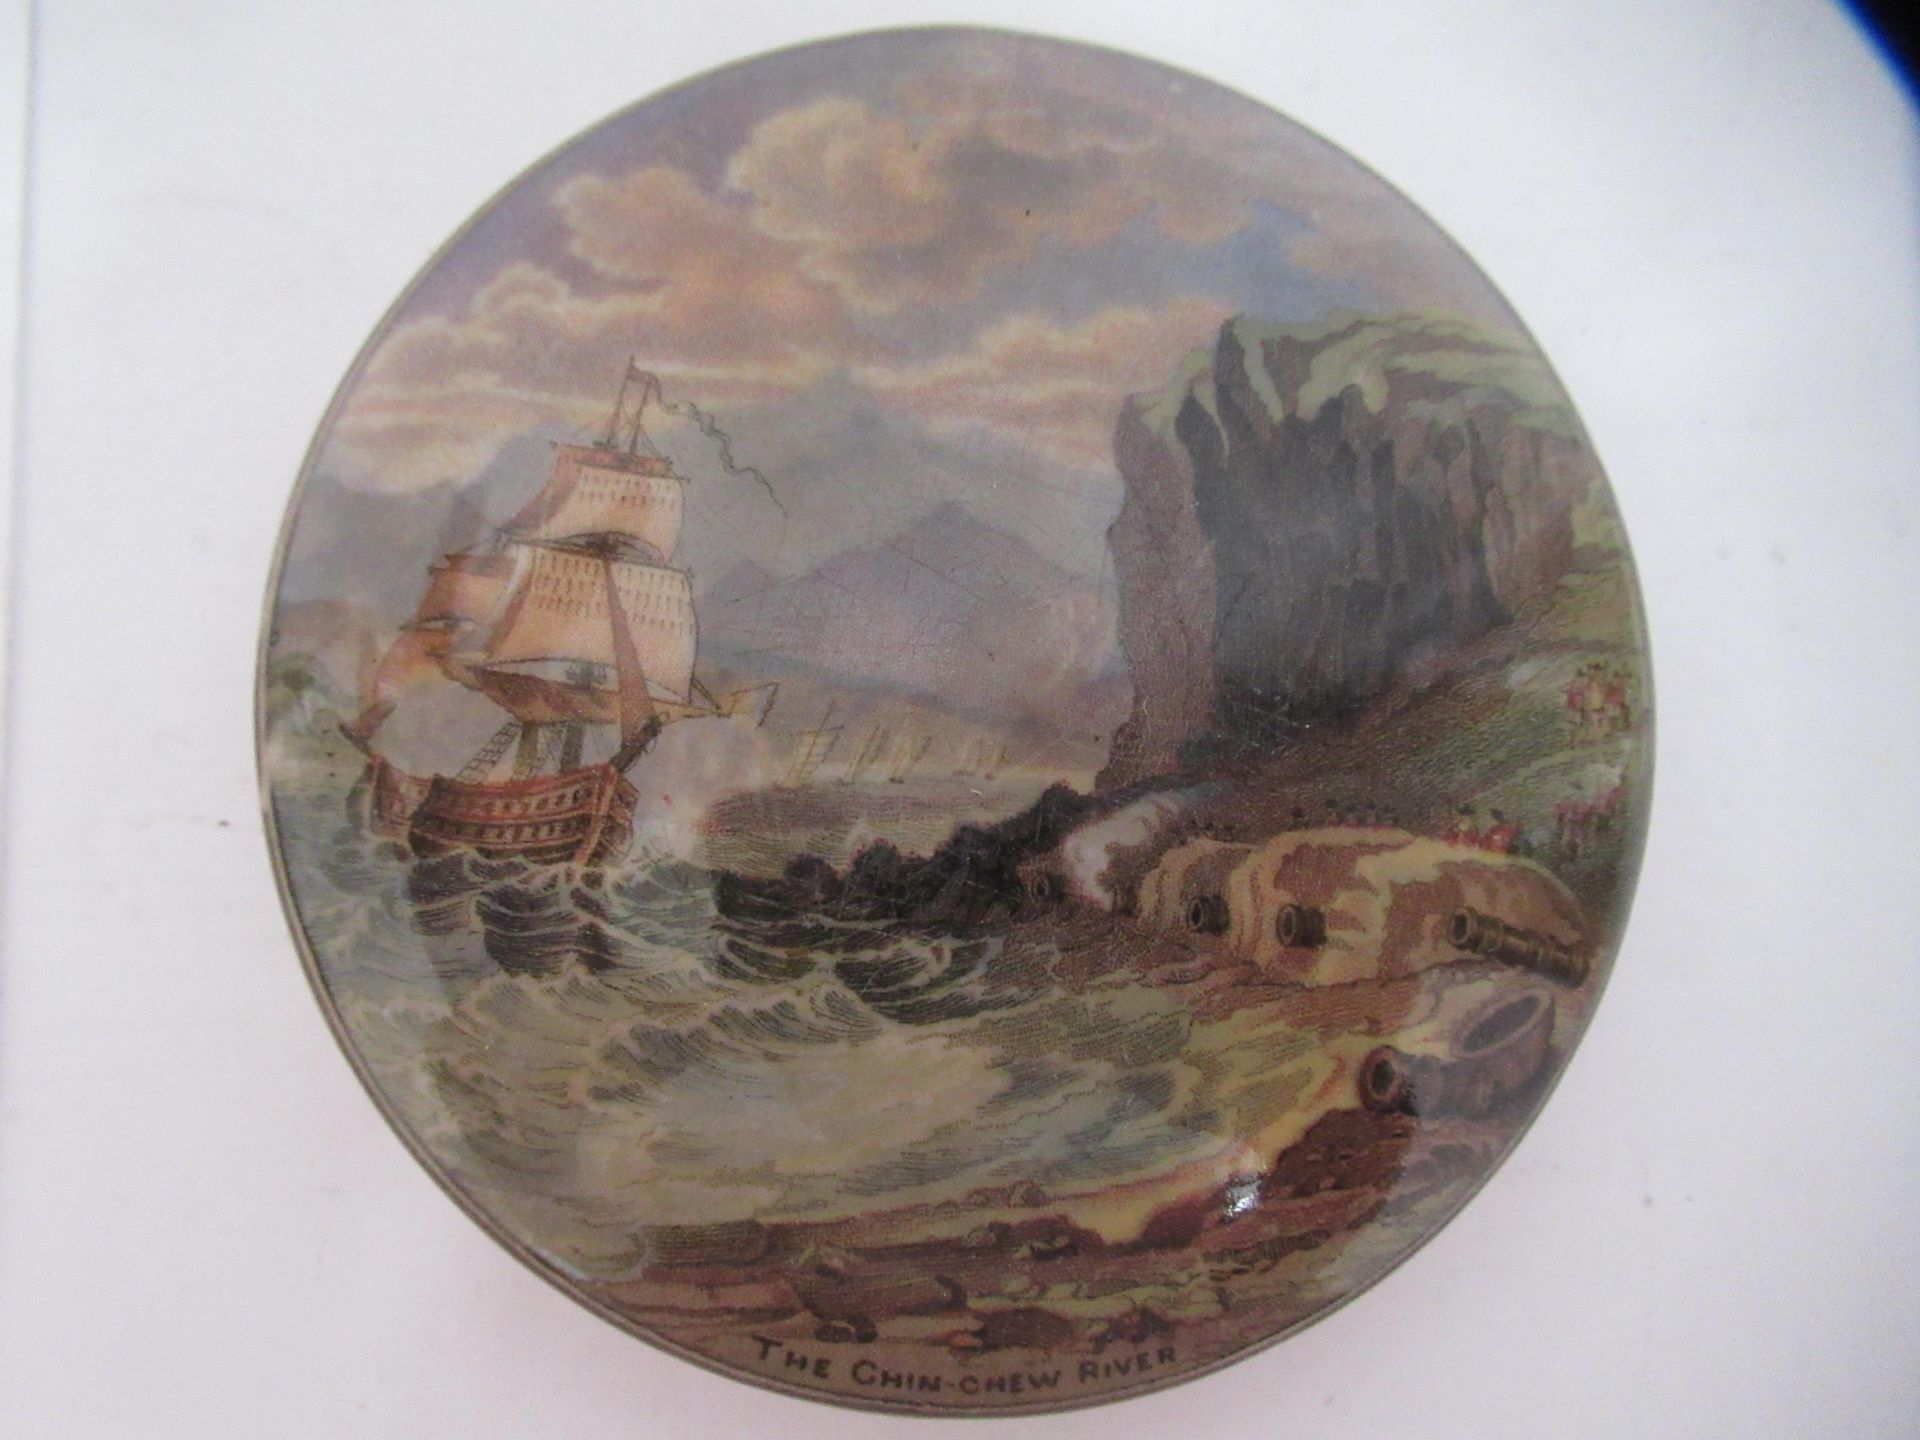 6x Prattware ceramic lids including 'Royal Harbour Ramsgate', 'The Chin-Chew River', 'Contrast', and - Image 17 of 21